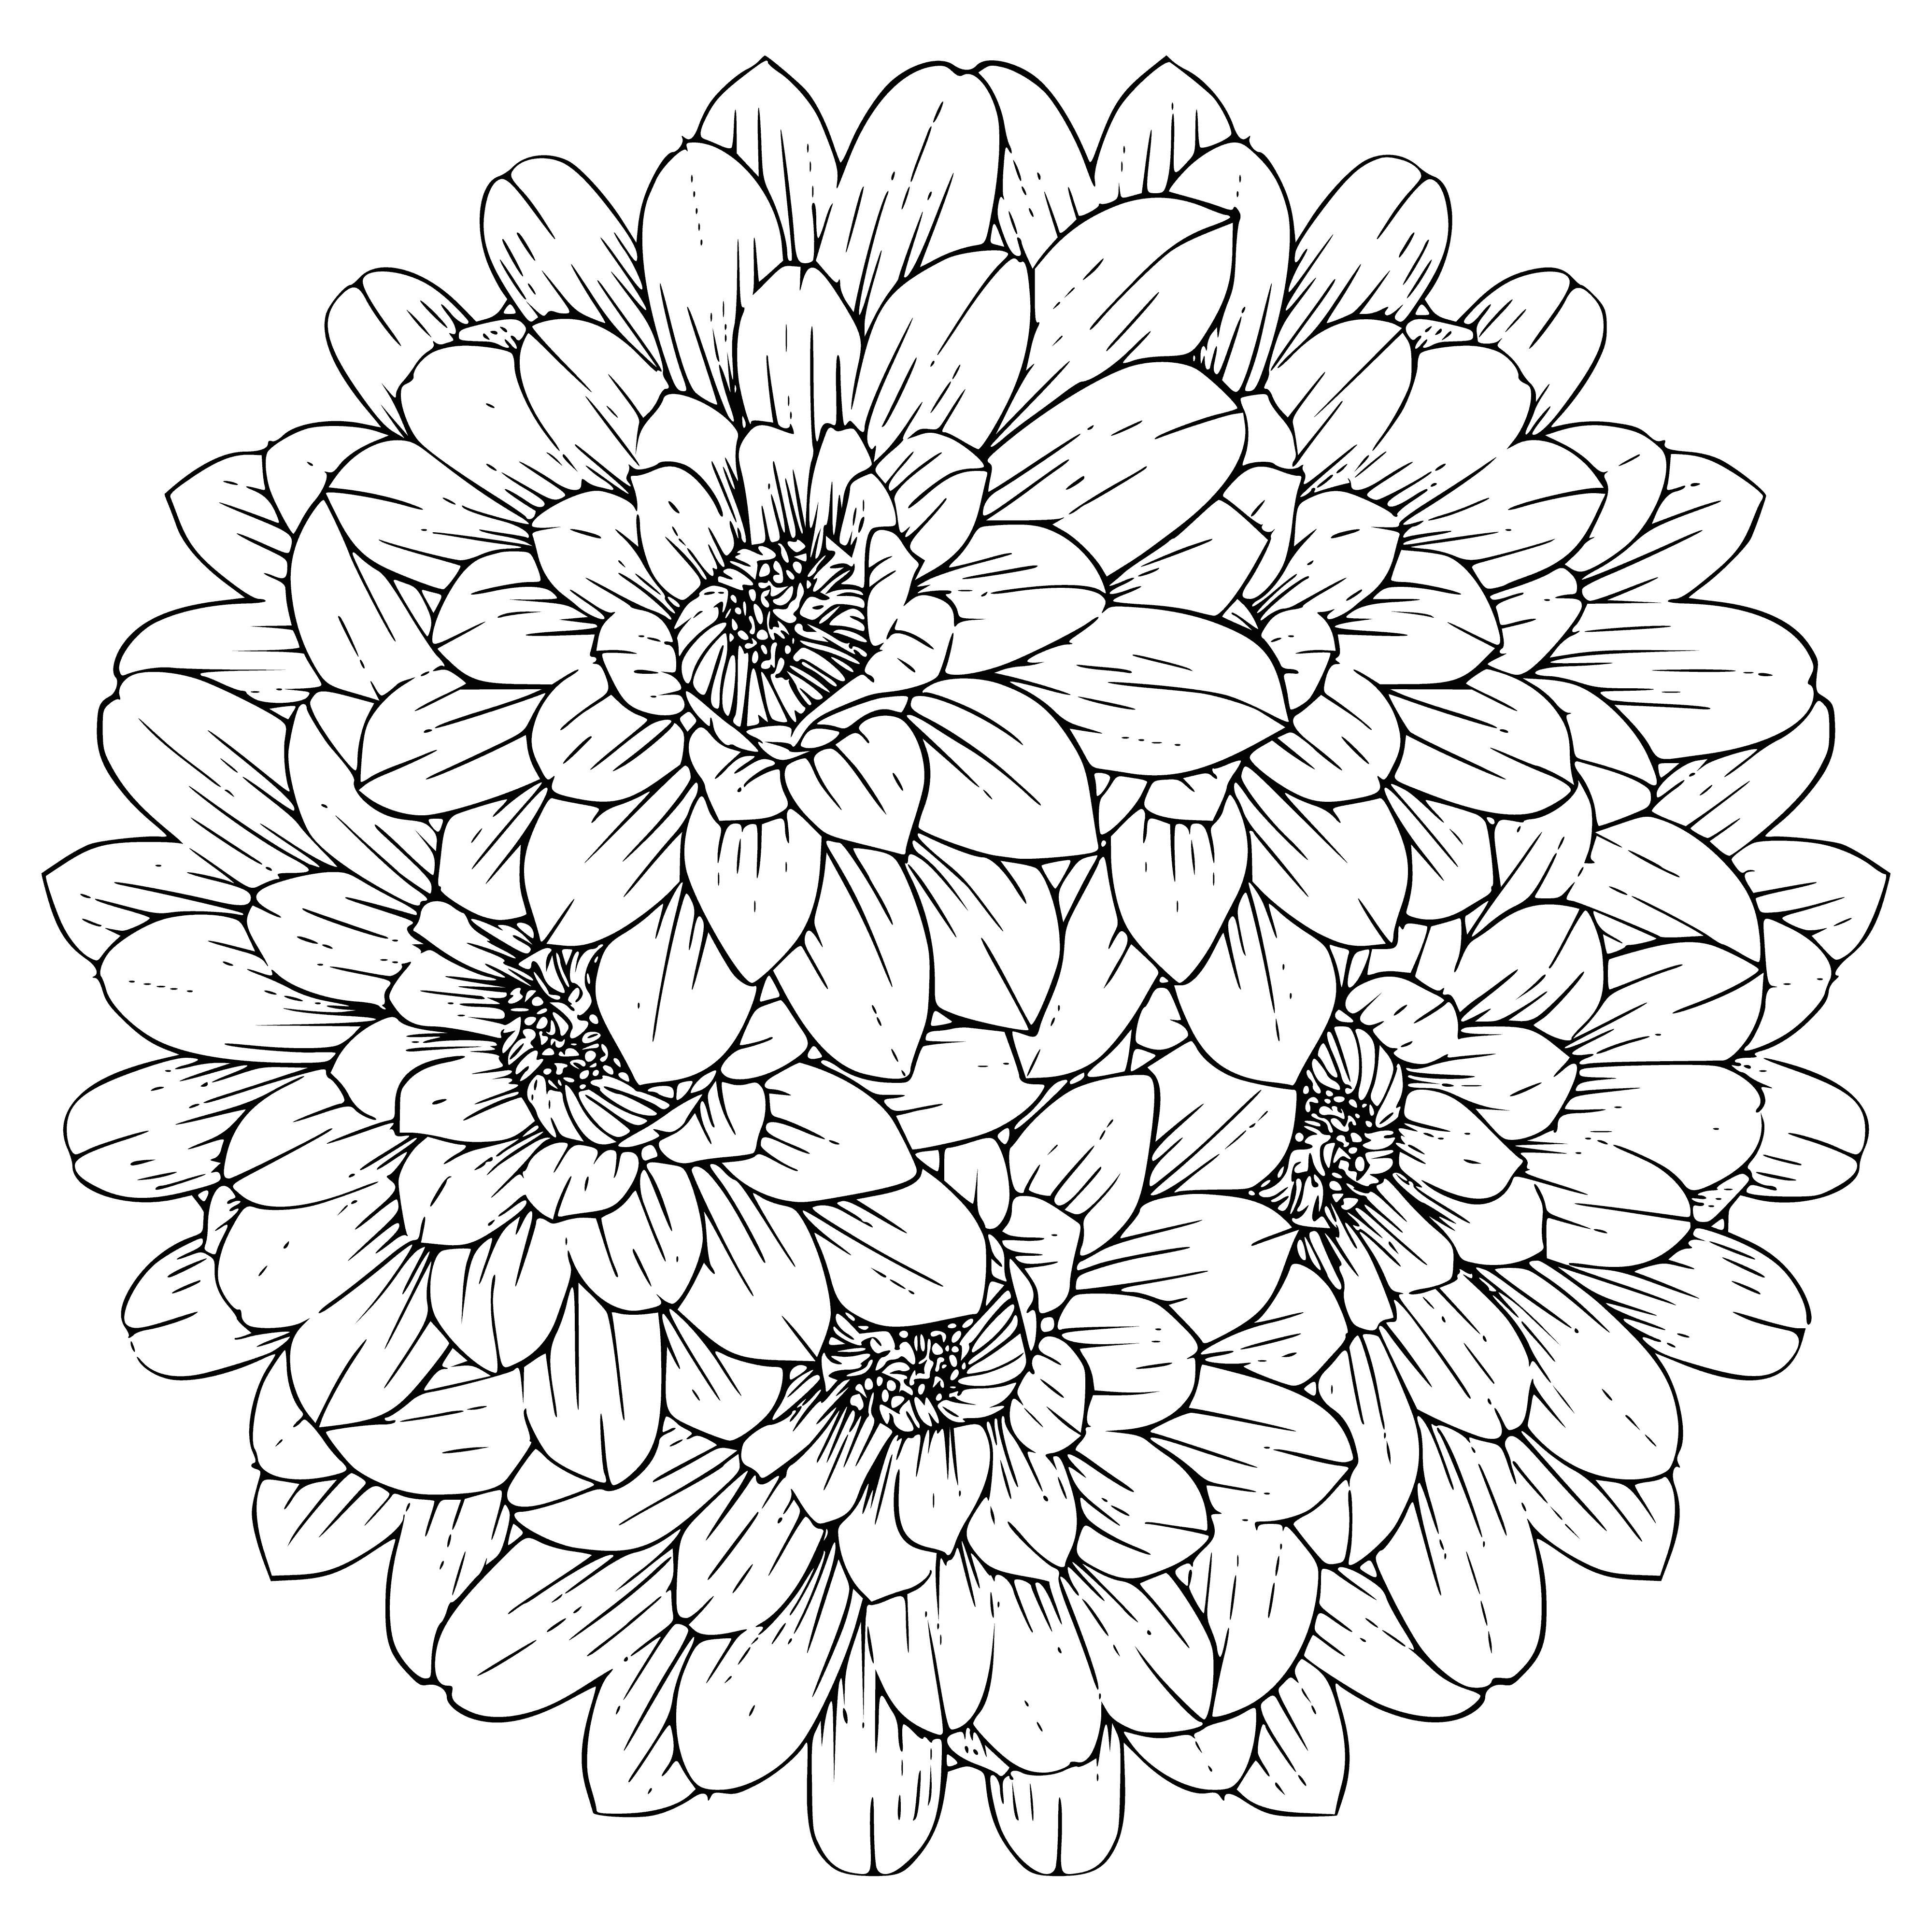 coloring page: Two flowers, one white, one purple, rest together with green leaves; a small bee rests on the white. Intricately detailed petals.